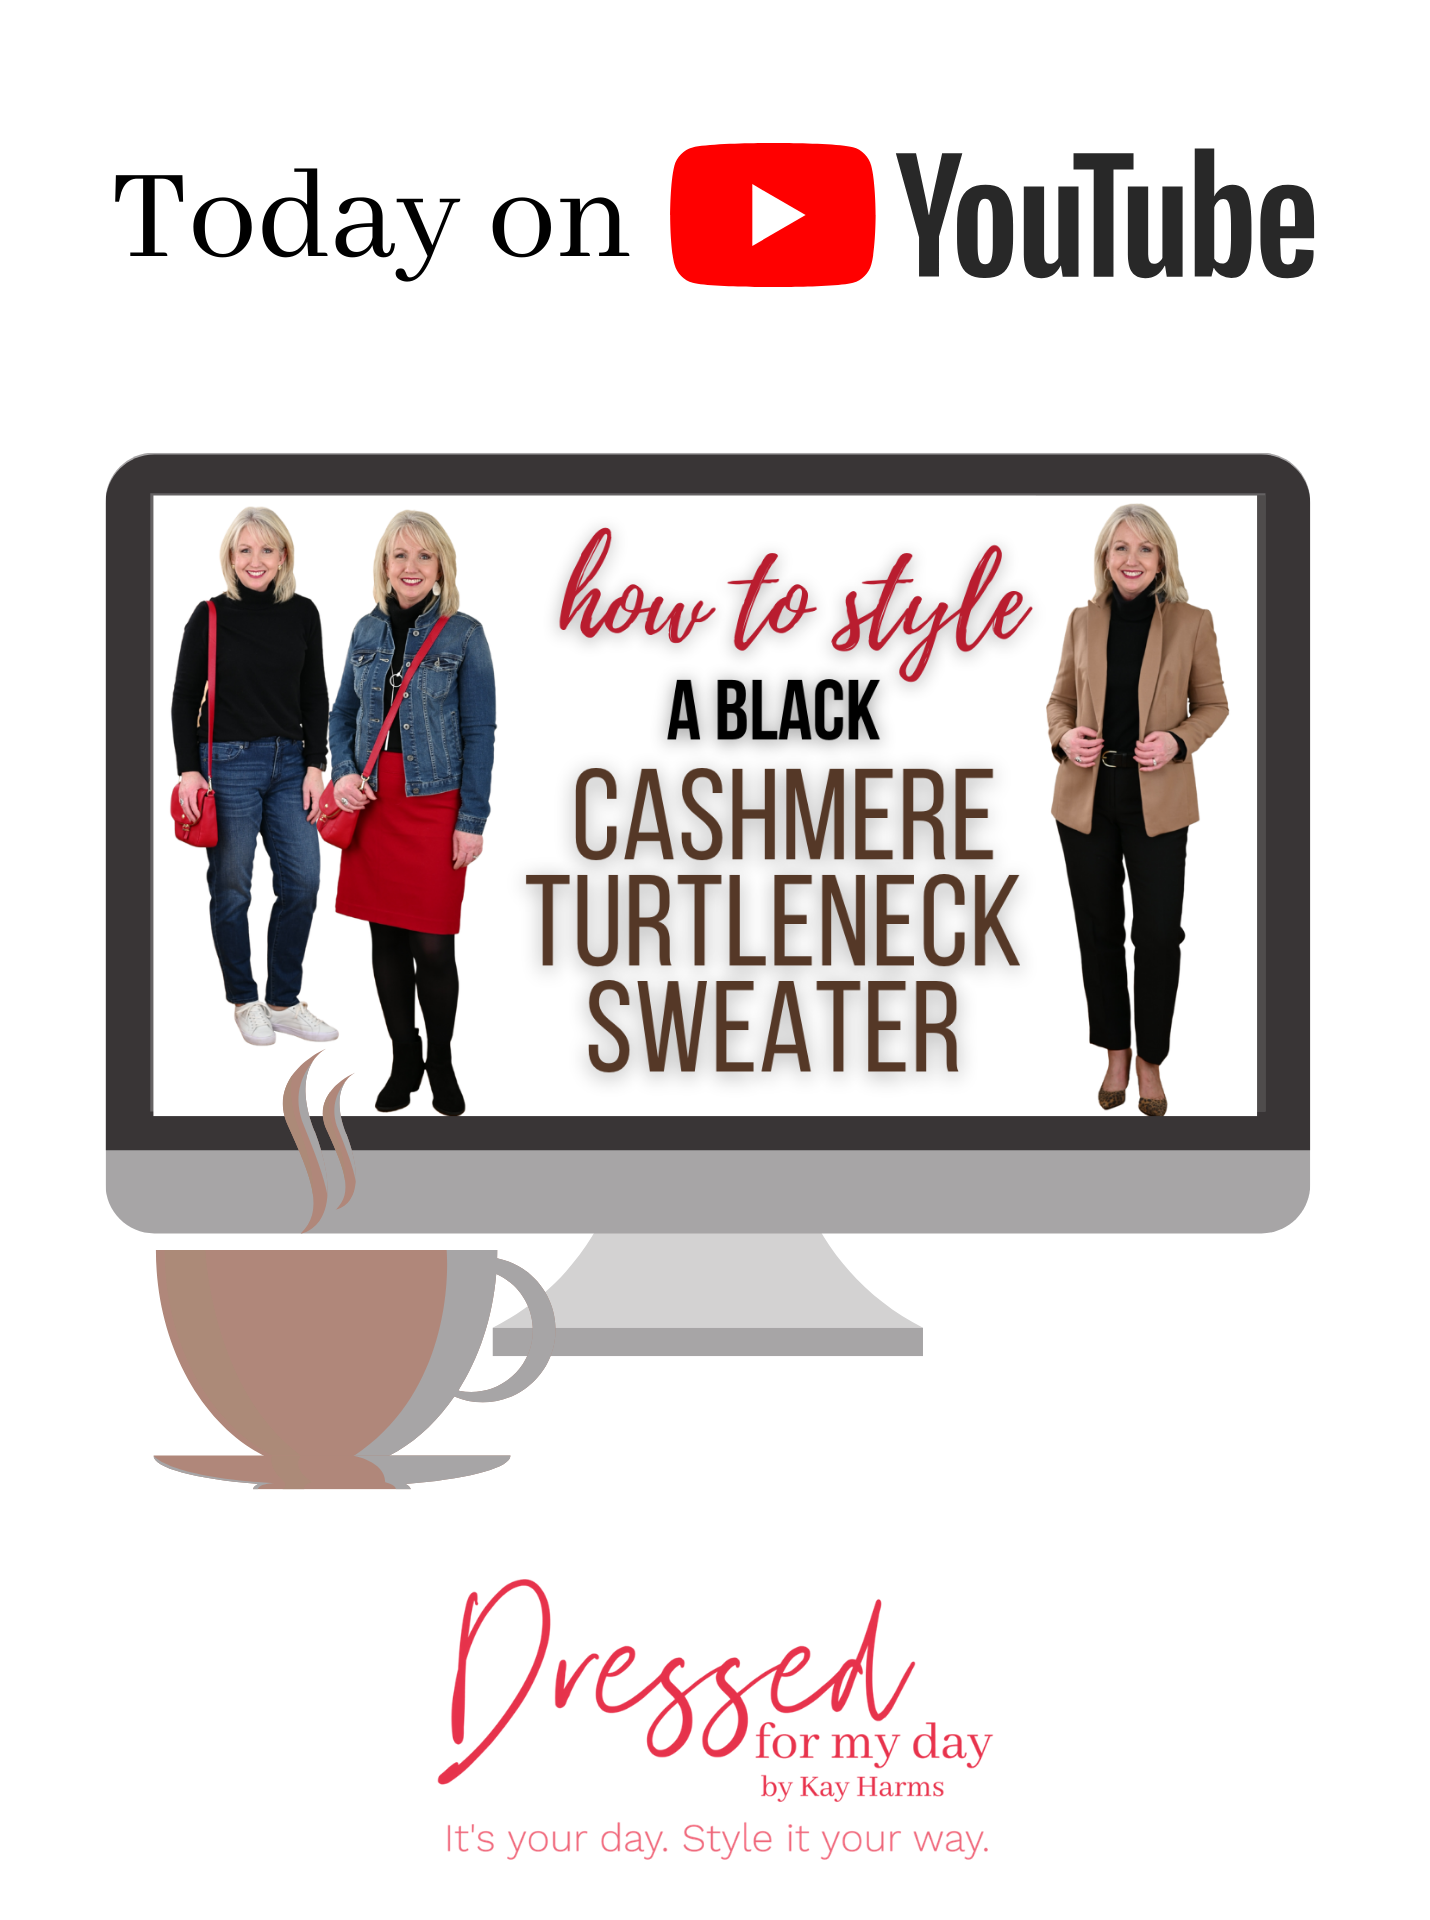 How to Style a Black Cashmere Turtleneck Sweater